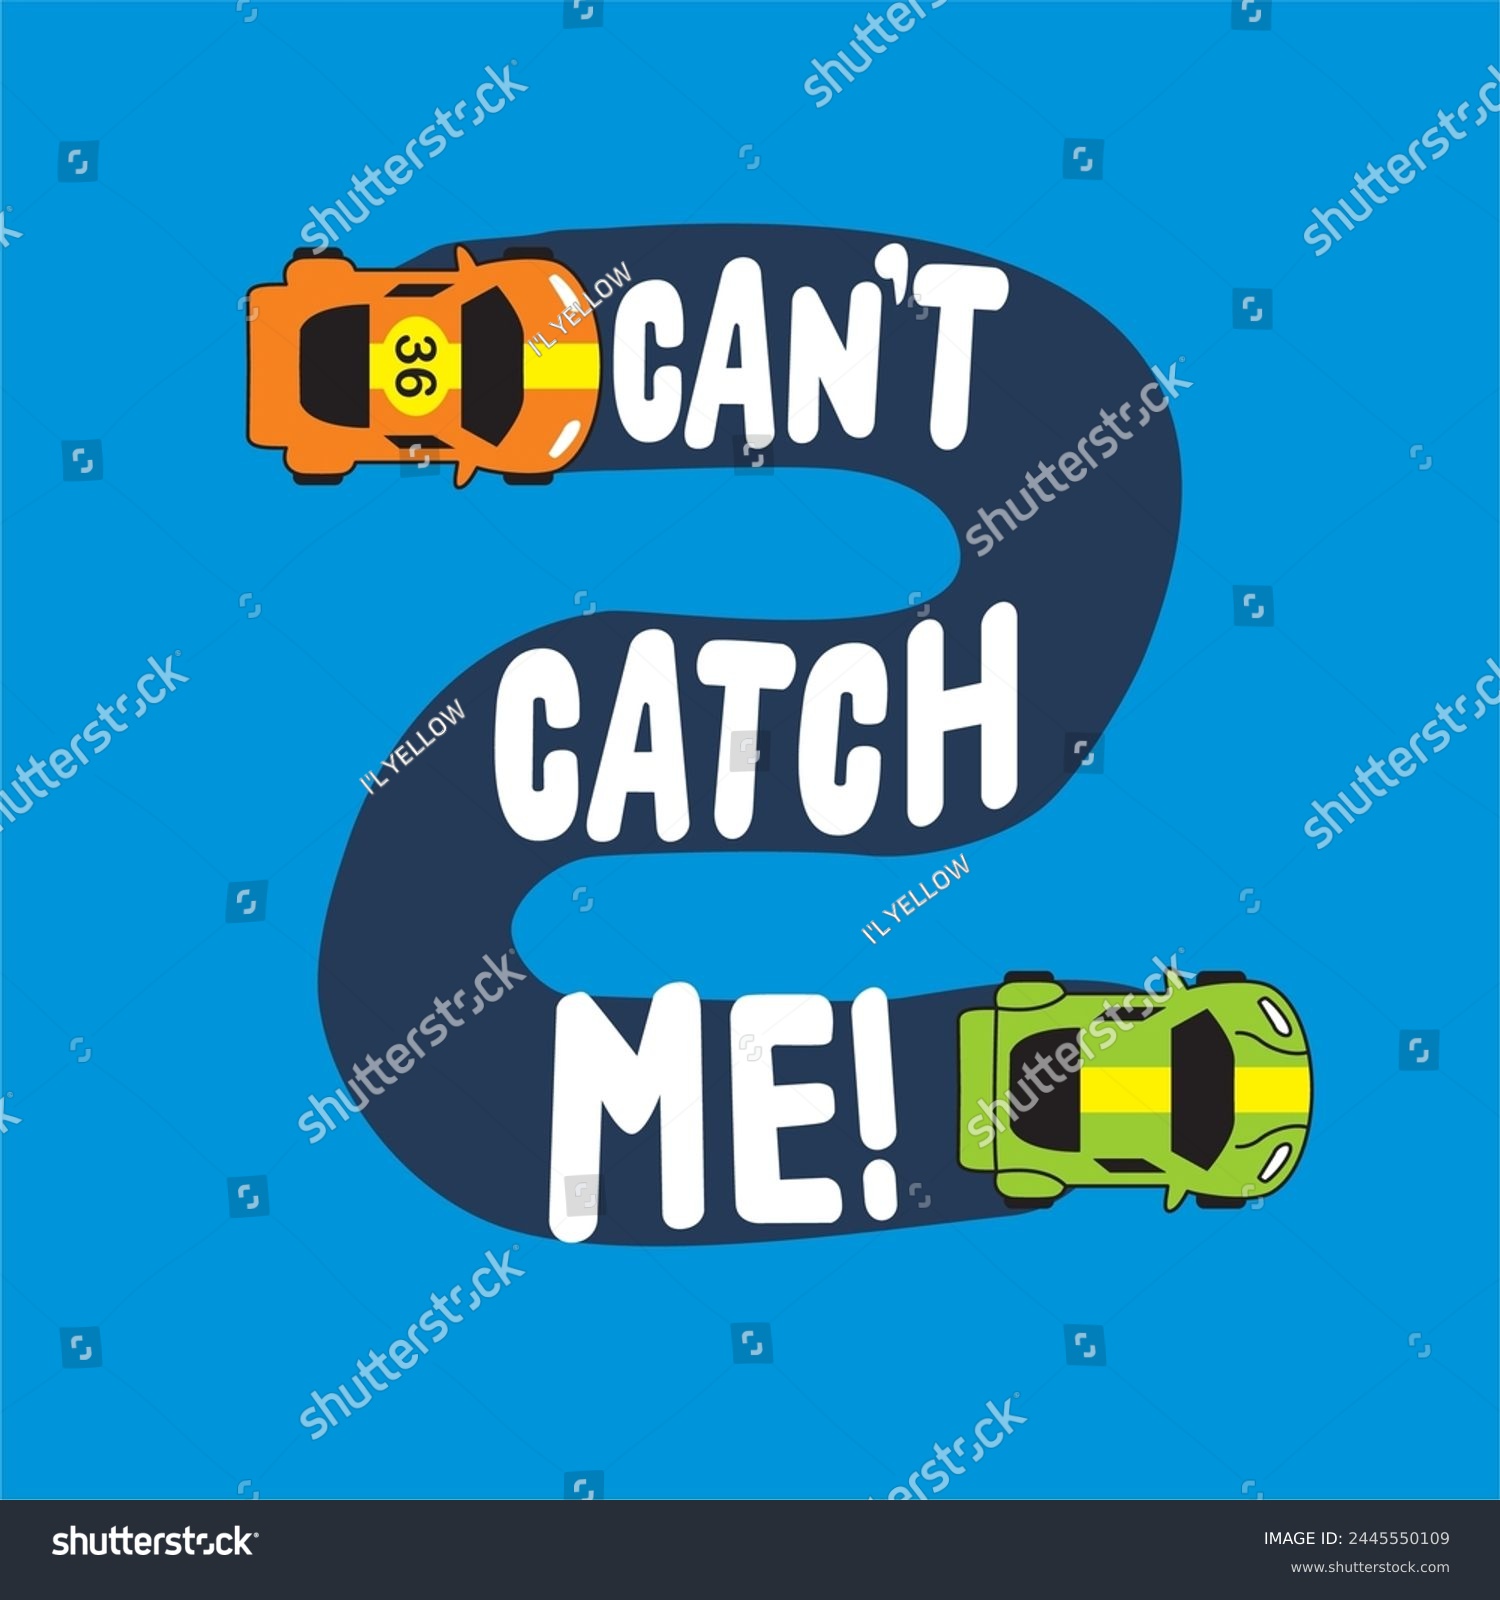 SVG of car racing , Can't Catch Me ! funny hand drawn doodle, cartoon alligator. Good for Poster or t-shirt textile graphic design. Vector hand drawn illustration. svg